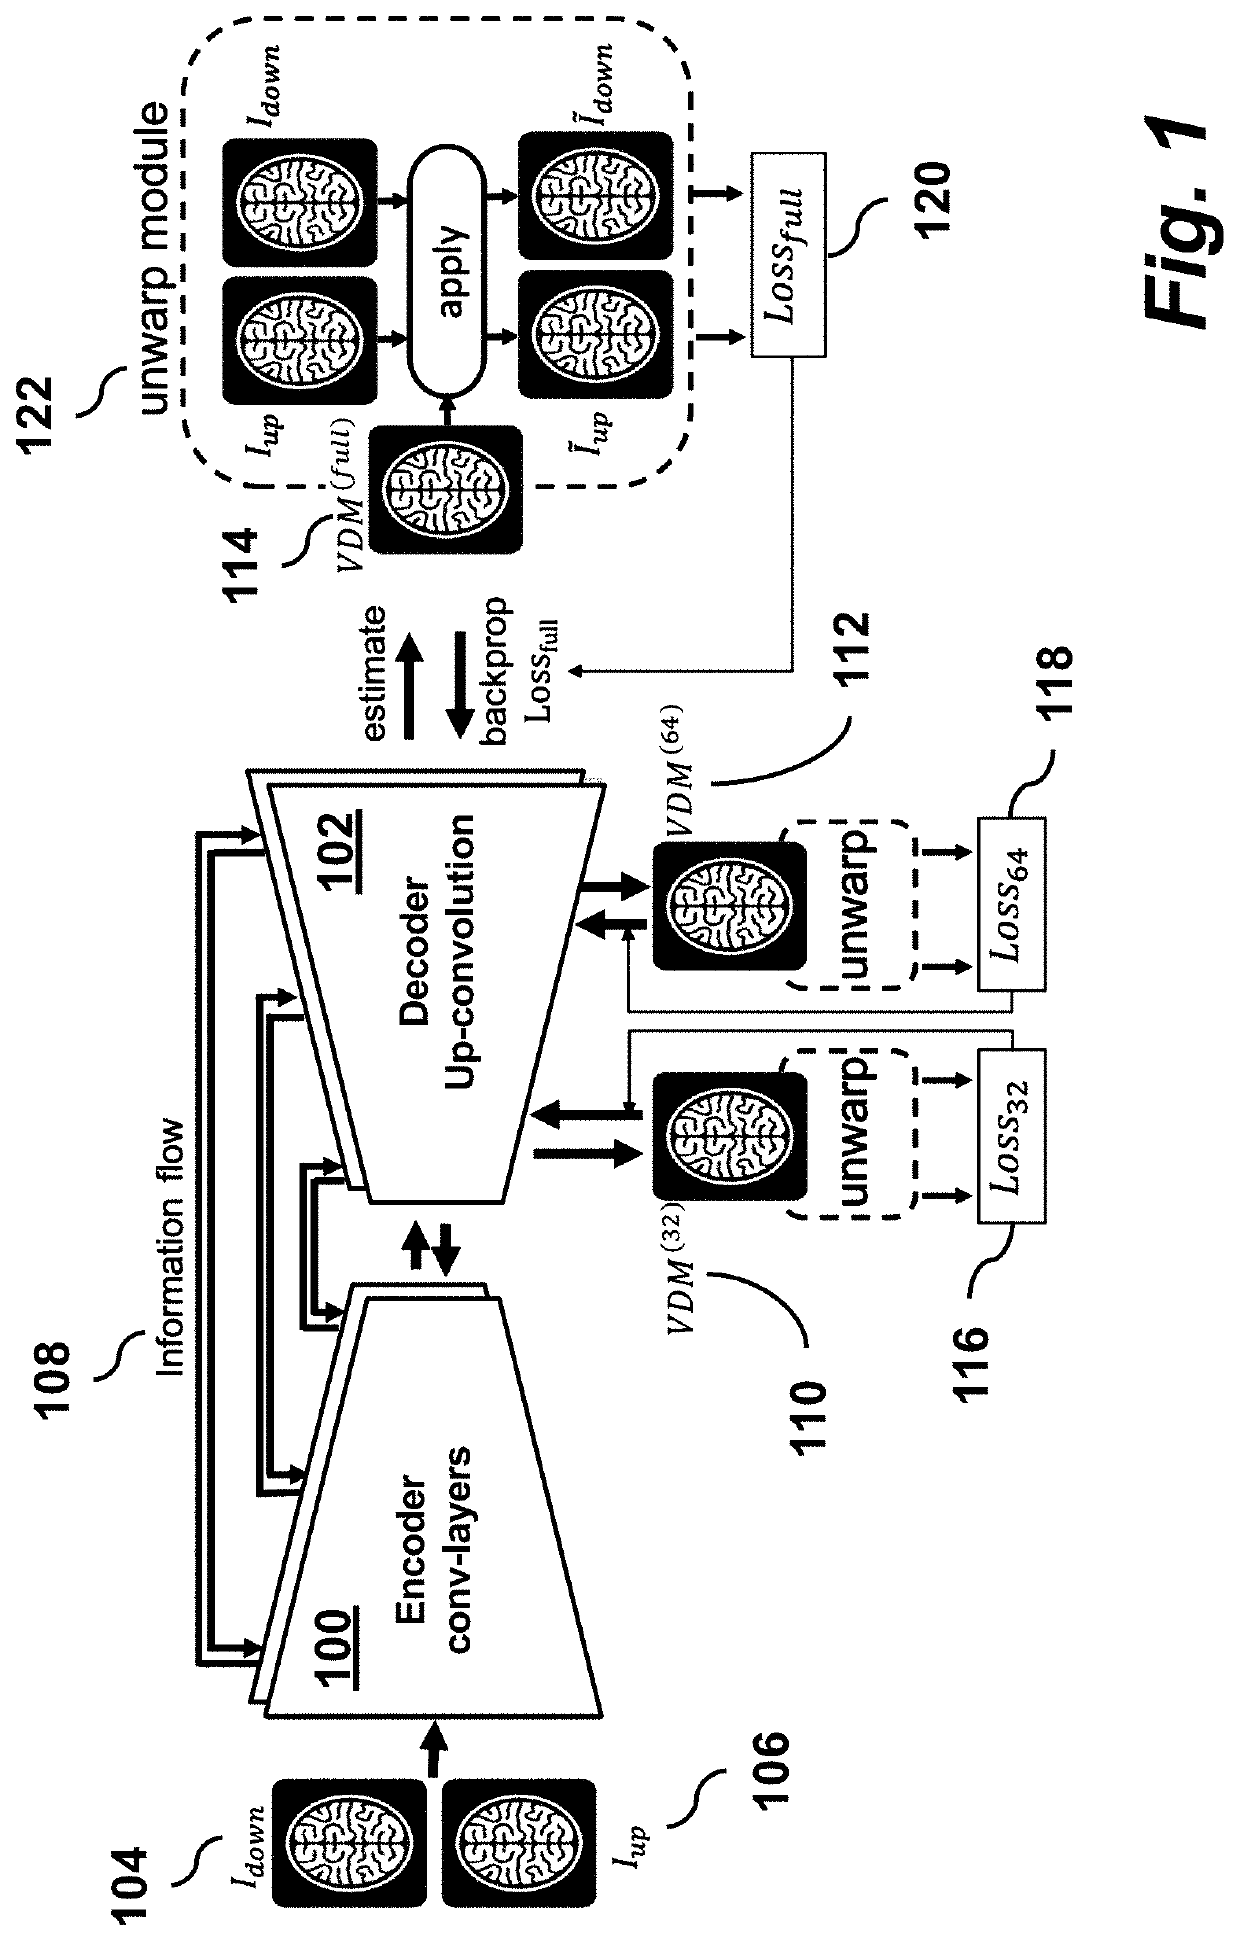 Un-supervised convolutional neural network for distortion map estimation and correction in MRI